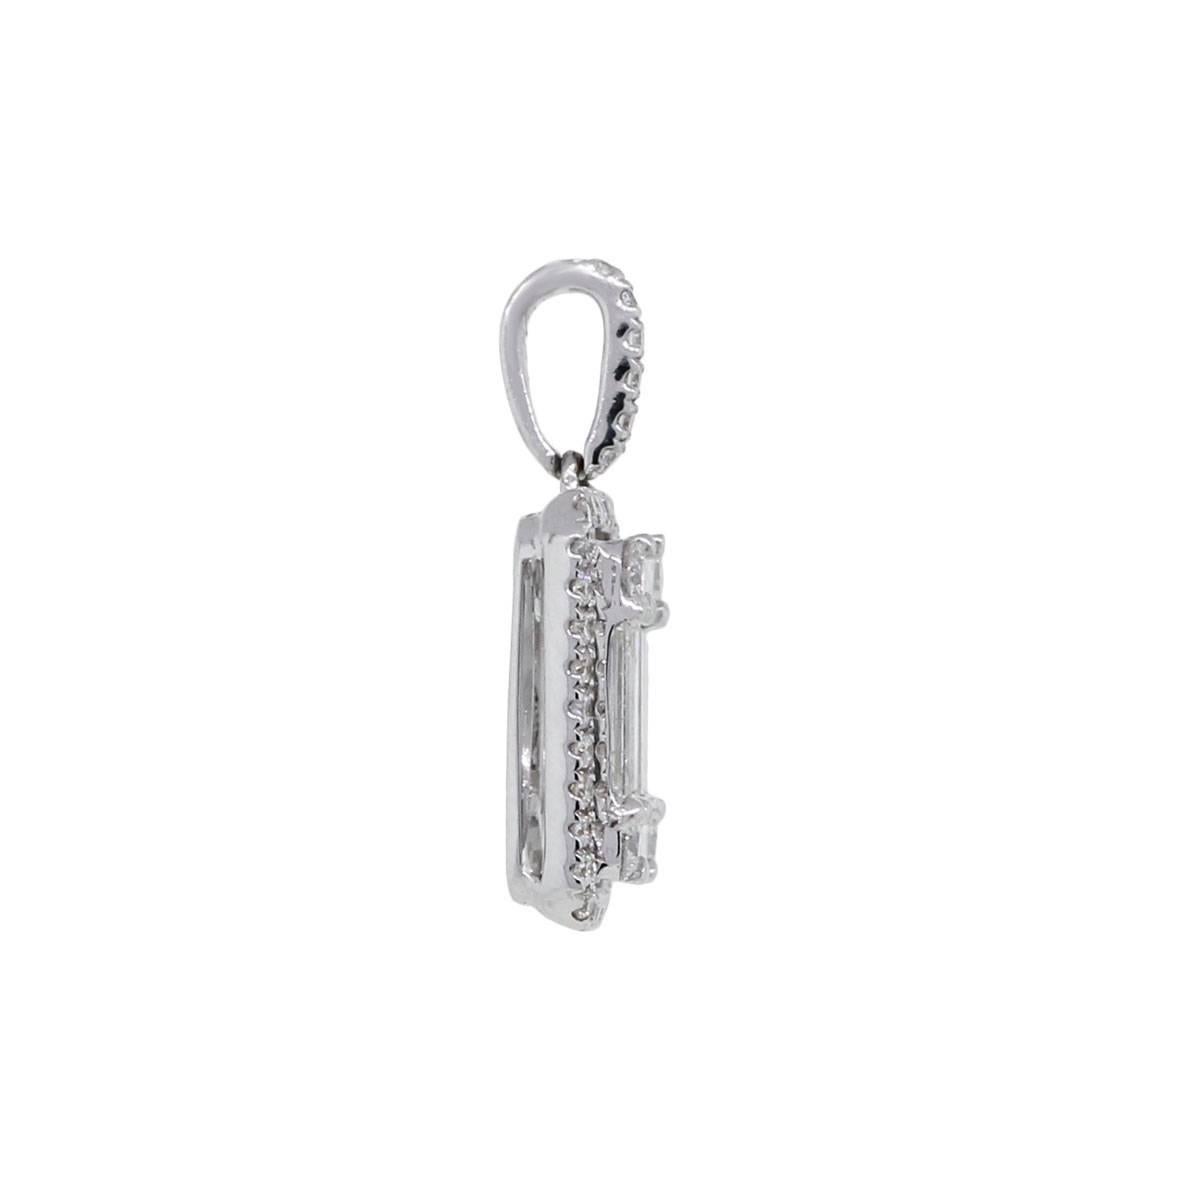 Material: 18k white gold
Diamond Details: Approximately 0.46ctw of baguette shape diamonds and 0.24ctw of round brilliant diamonds. Diamonds are F/G in color, SI in clarity
Pendant Measurements: 0.70″ x 0.16″ x 0.40″
Total Weight: 1.8g (1.1dwt)
SKU: